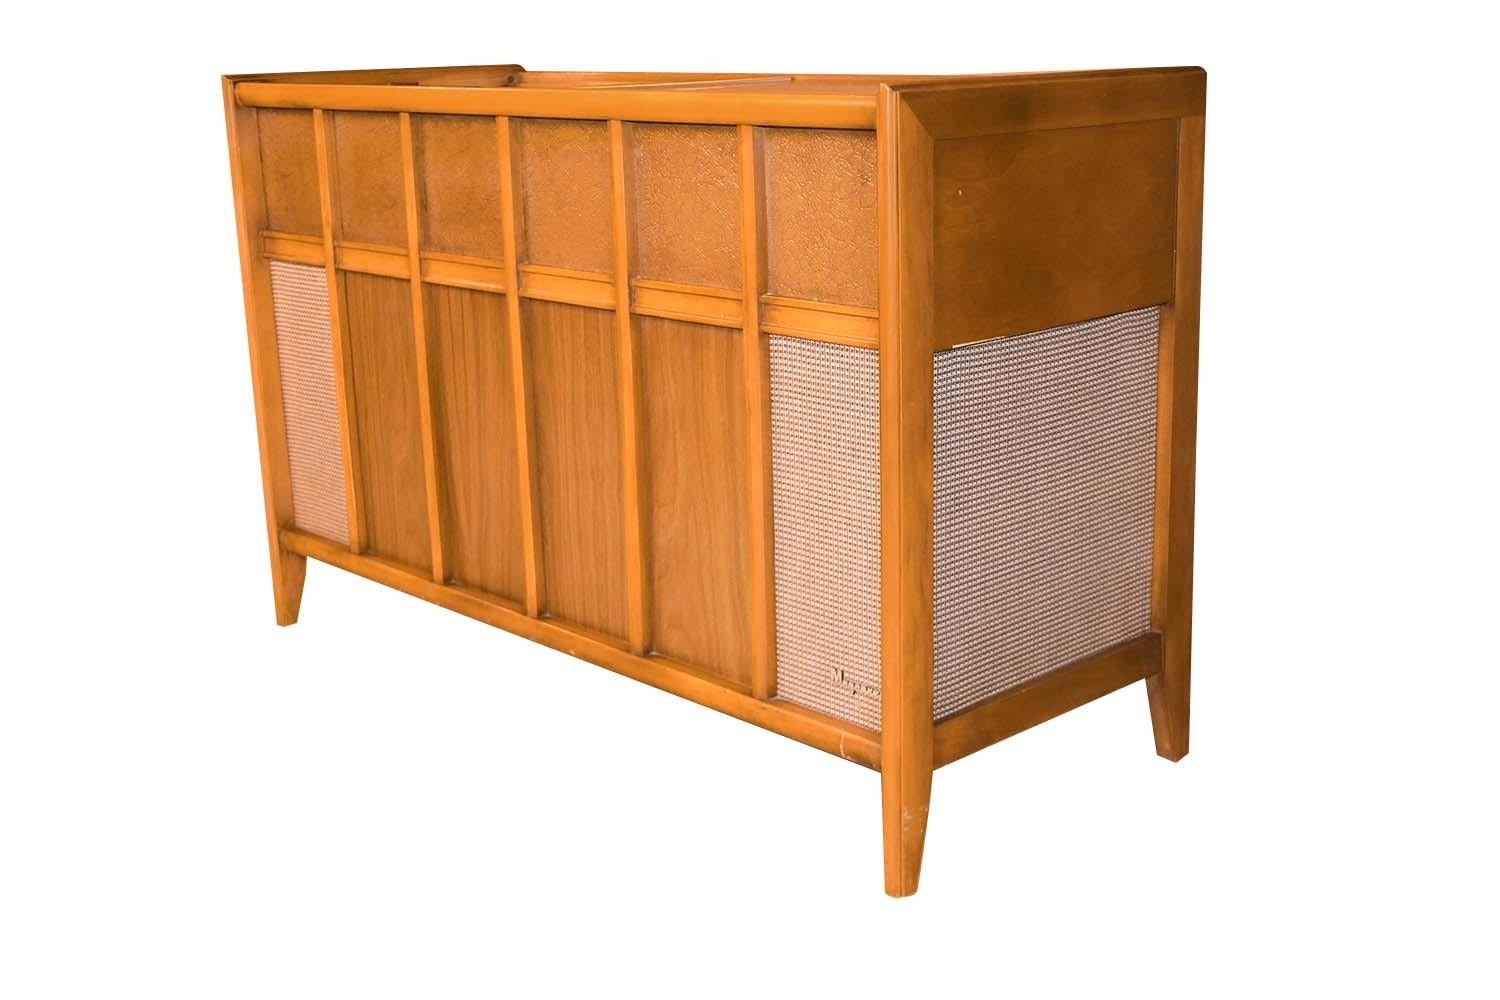 A vintage 1960's Mid-Century Modern stereophonic high-fidelity console by Magnavox. This rare mid century console consists of maple sides, trim and frame, laminate and leather panel inserts. The laminate sliding doors to top provide easy access to